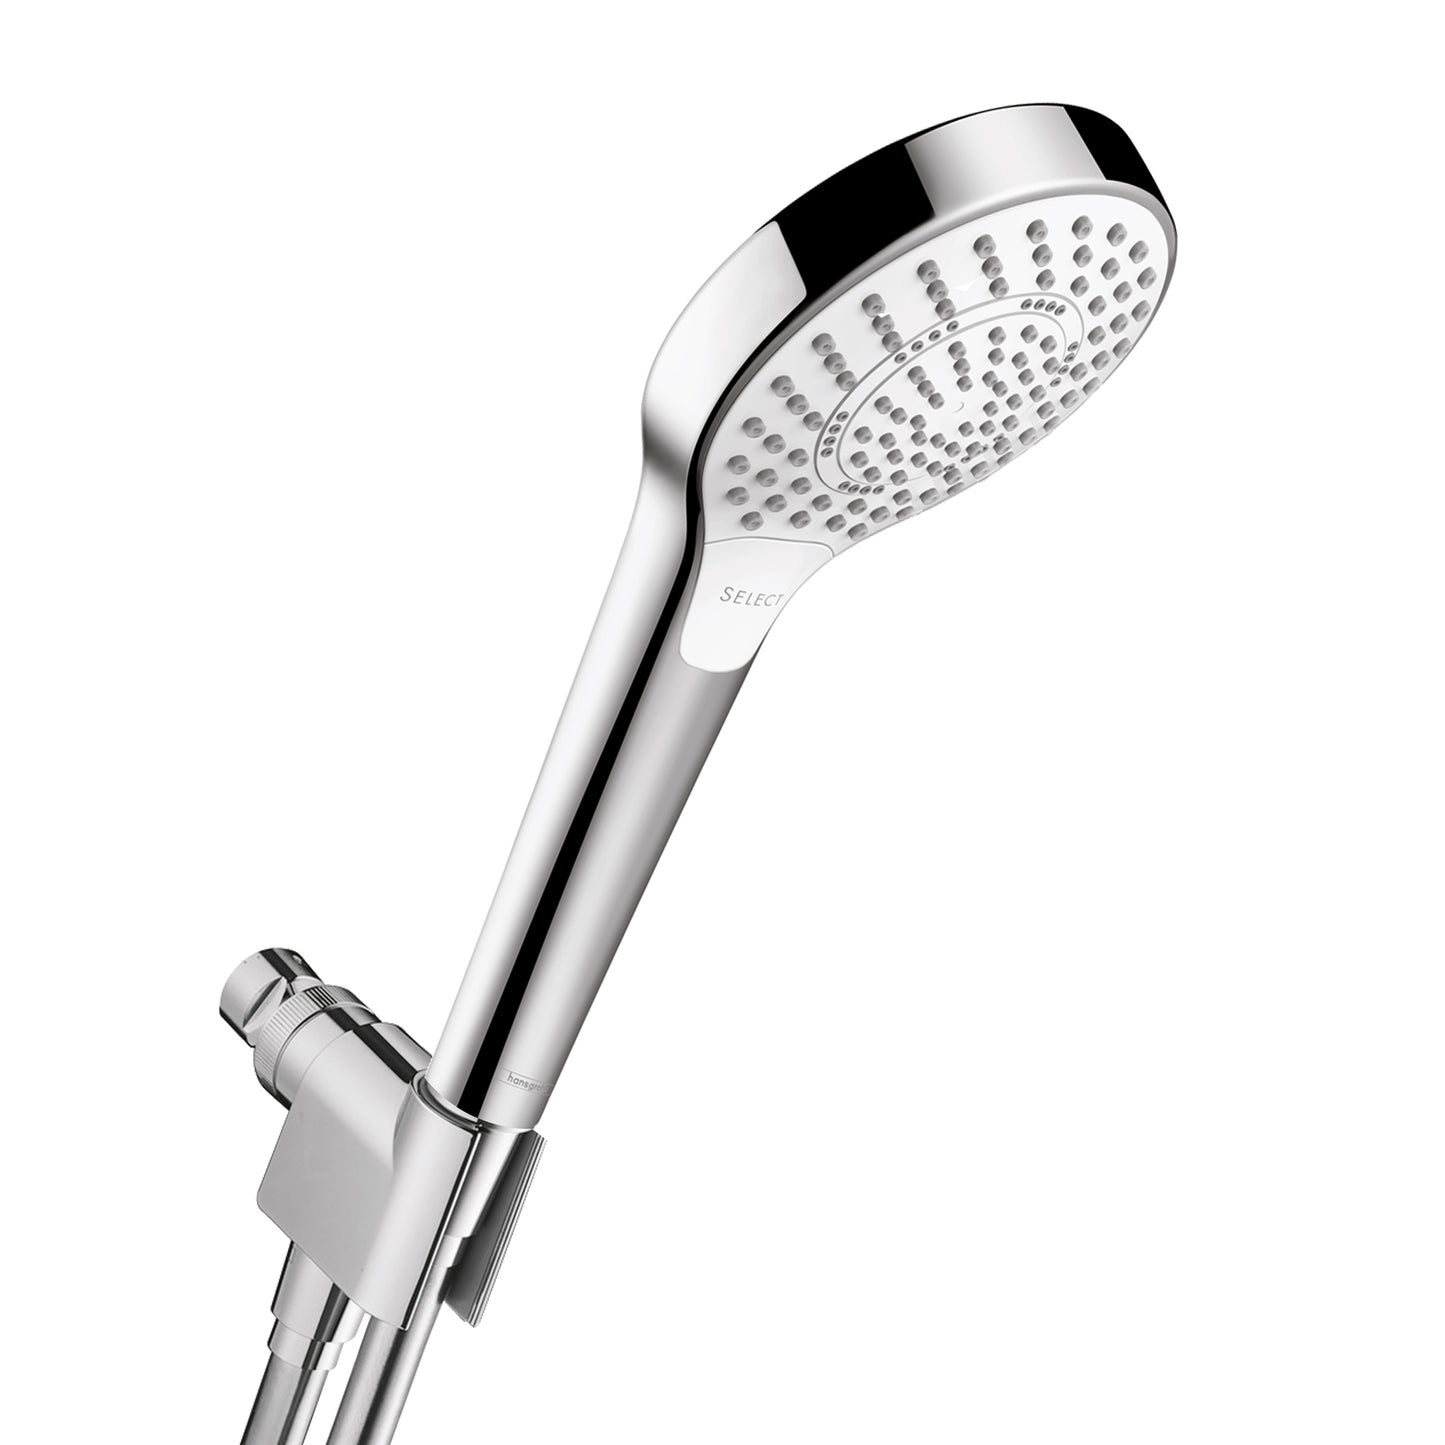 HANSGROHE 04936000 Chrome Croma Select S Handshower Set 1.75 GPM